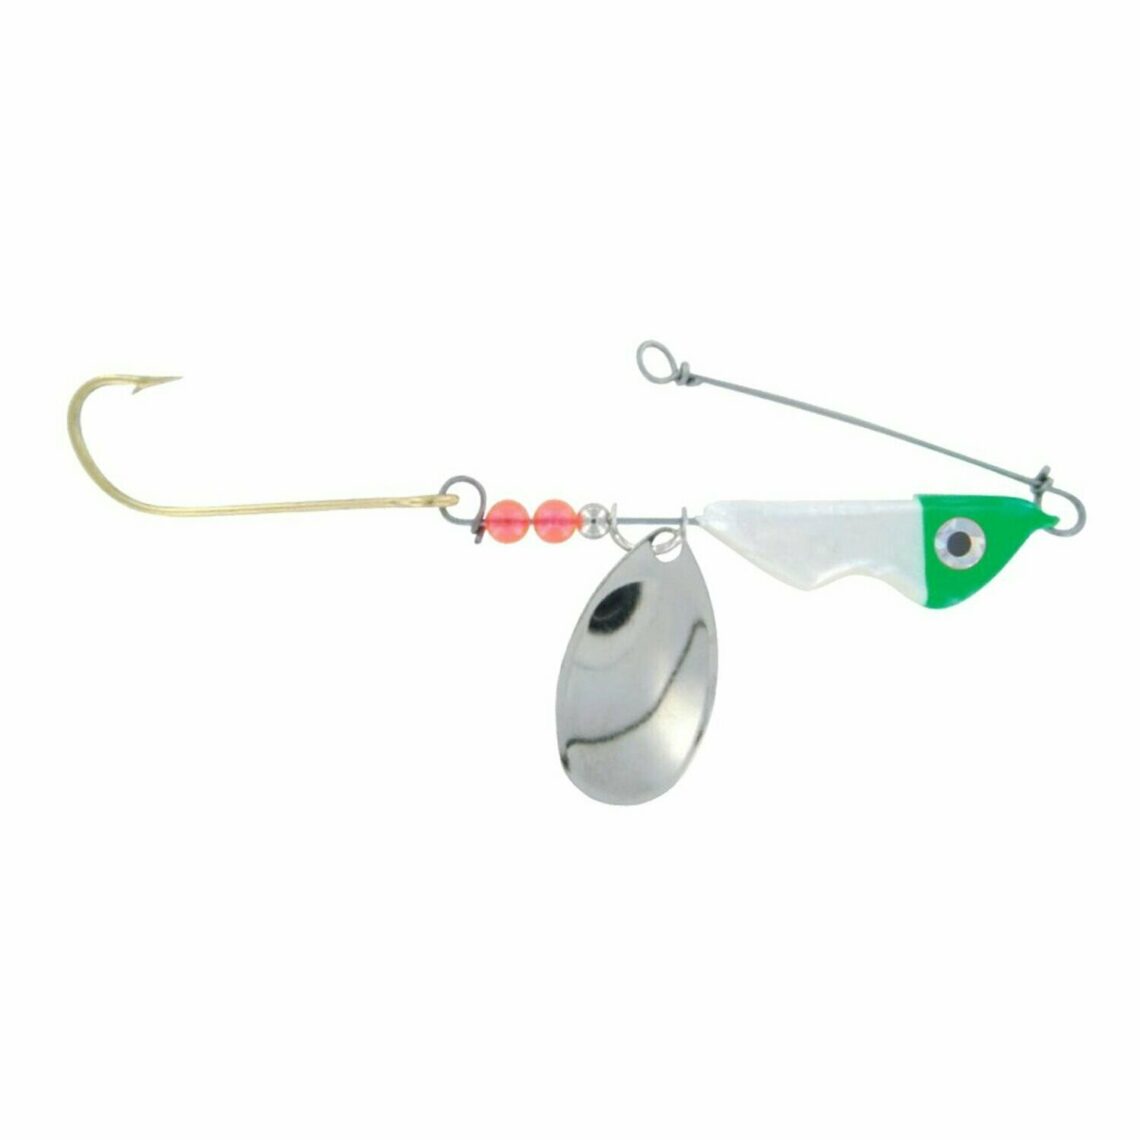 Erie Dearie Original White and Green Fishing Lure, 5/8 oz 